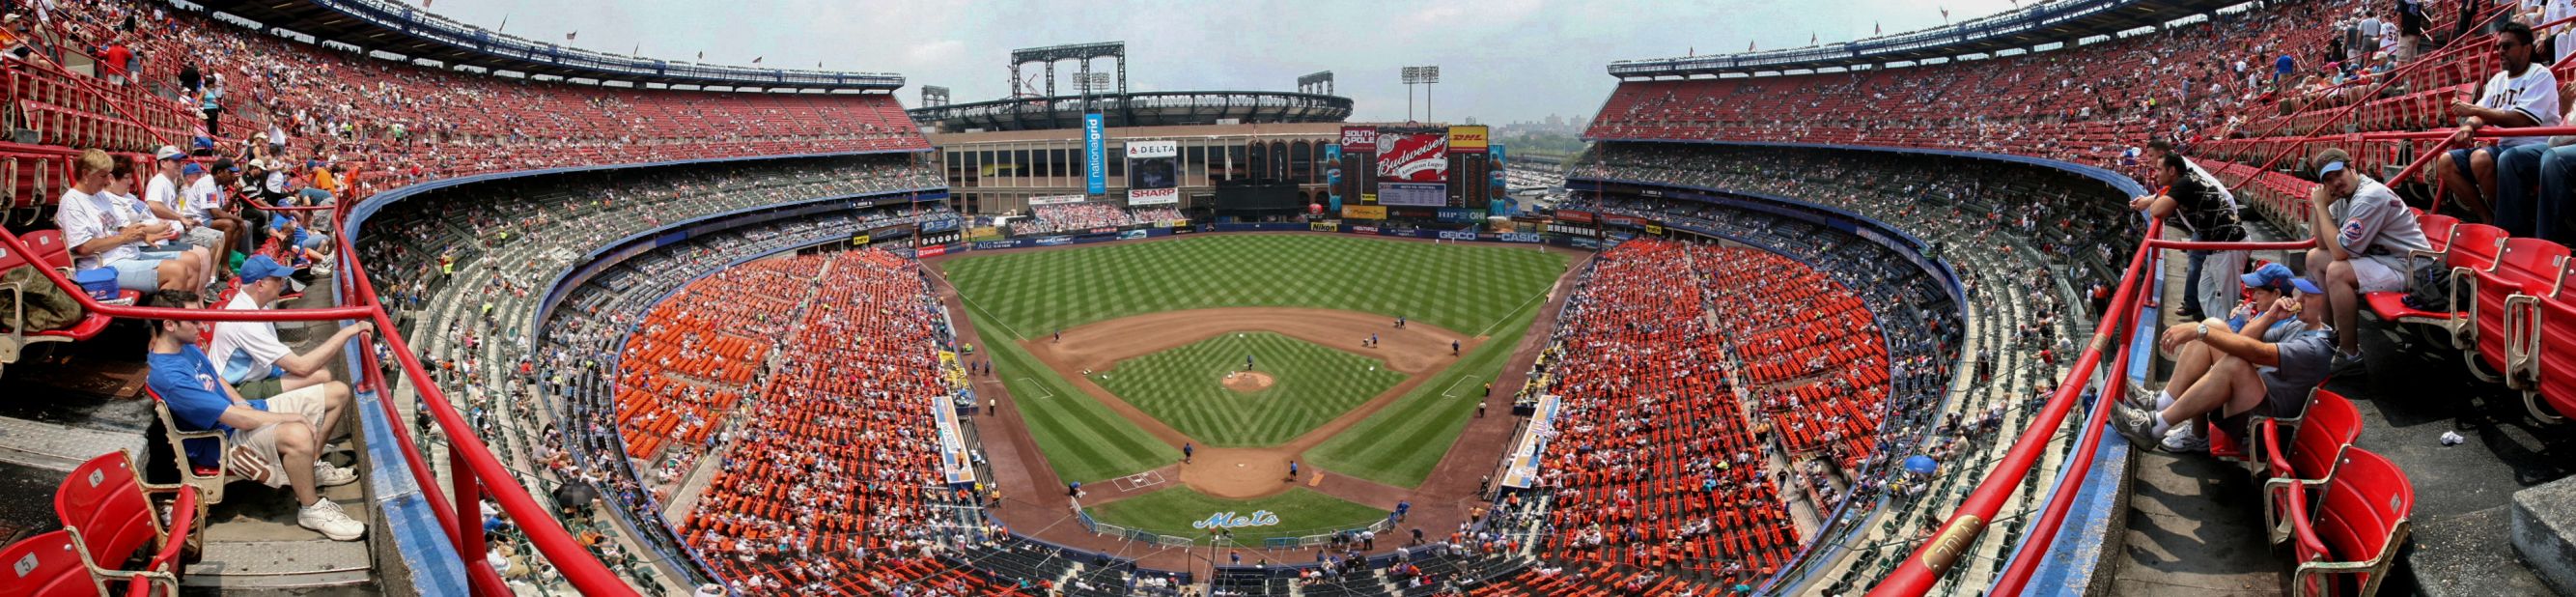 <strong>Shea Stadium (2008): </strong>Ondrovic and his pals rank the Mets' former home among the worst ballparks, but it will always remain his favorite for the memories. The Mets played there from 1964 to 2008 and moved to Citi Field in 2009. Shea was demolished the same year.